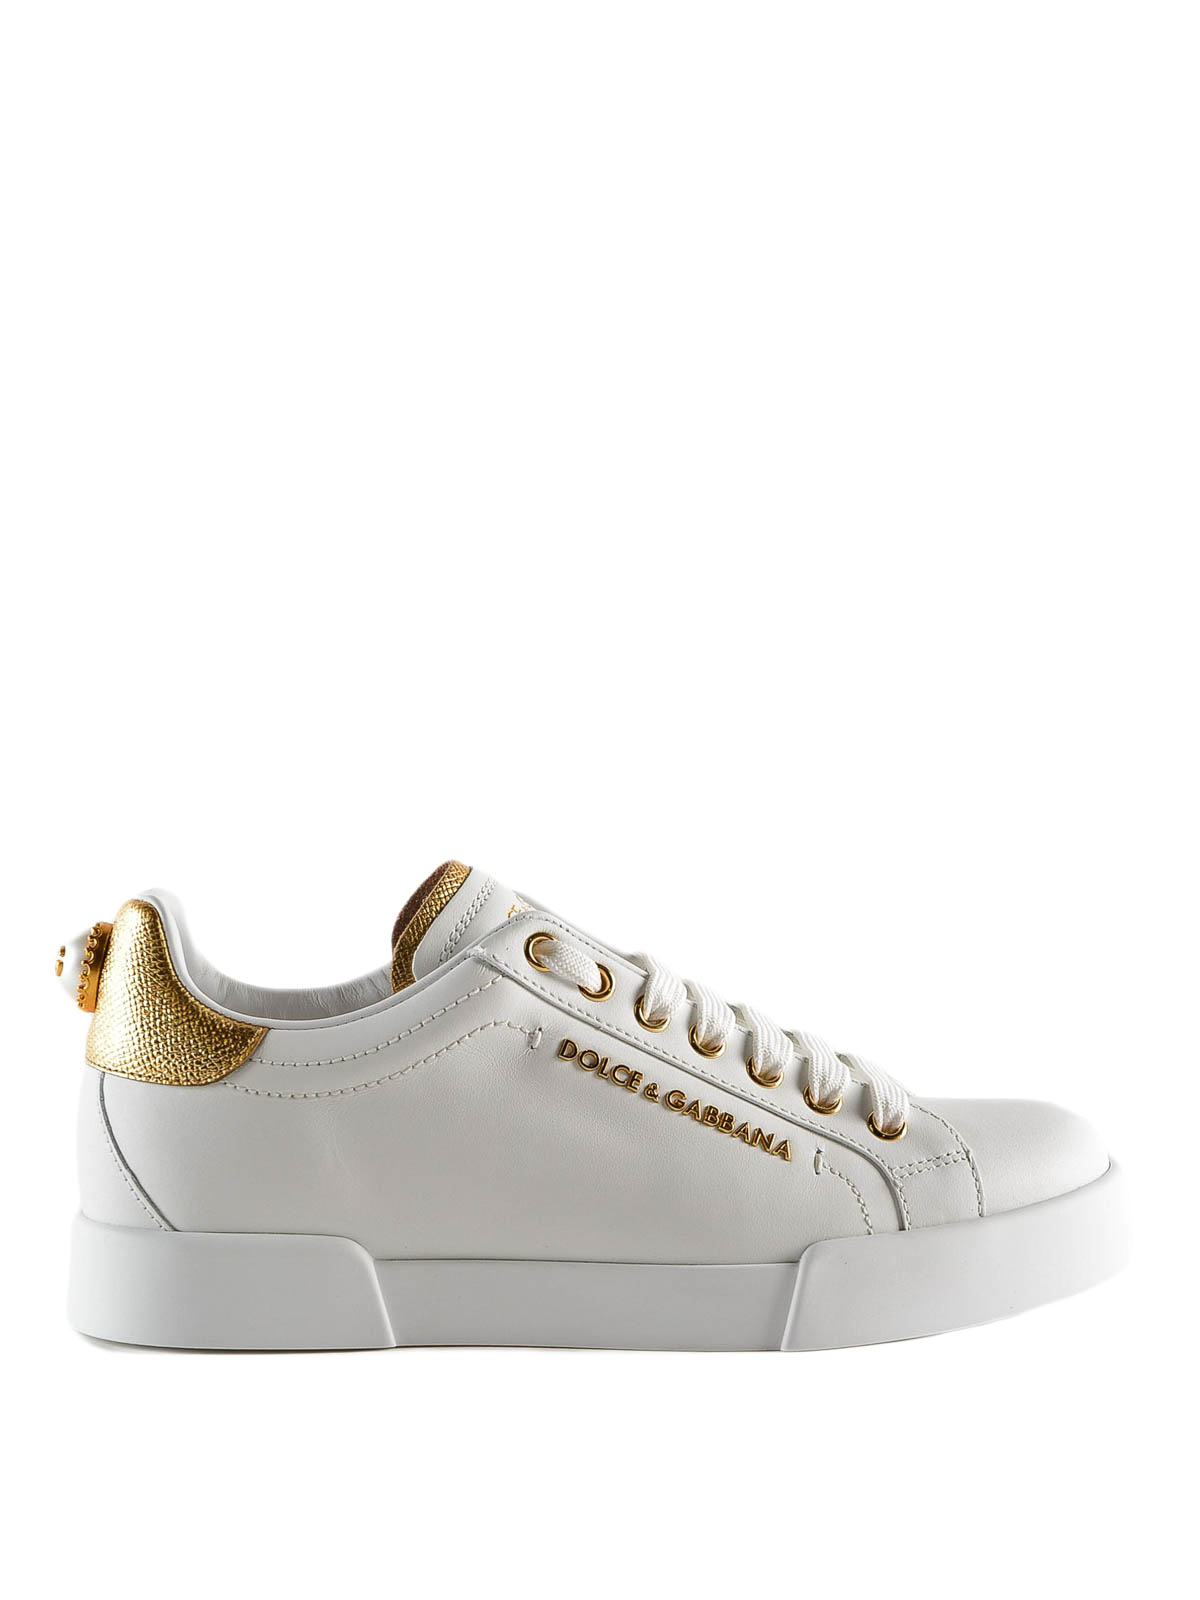 Dolce & Gabbana Logo Pearl White Leather Trainers In Blanco